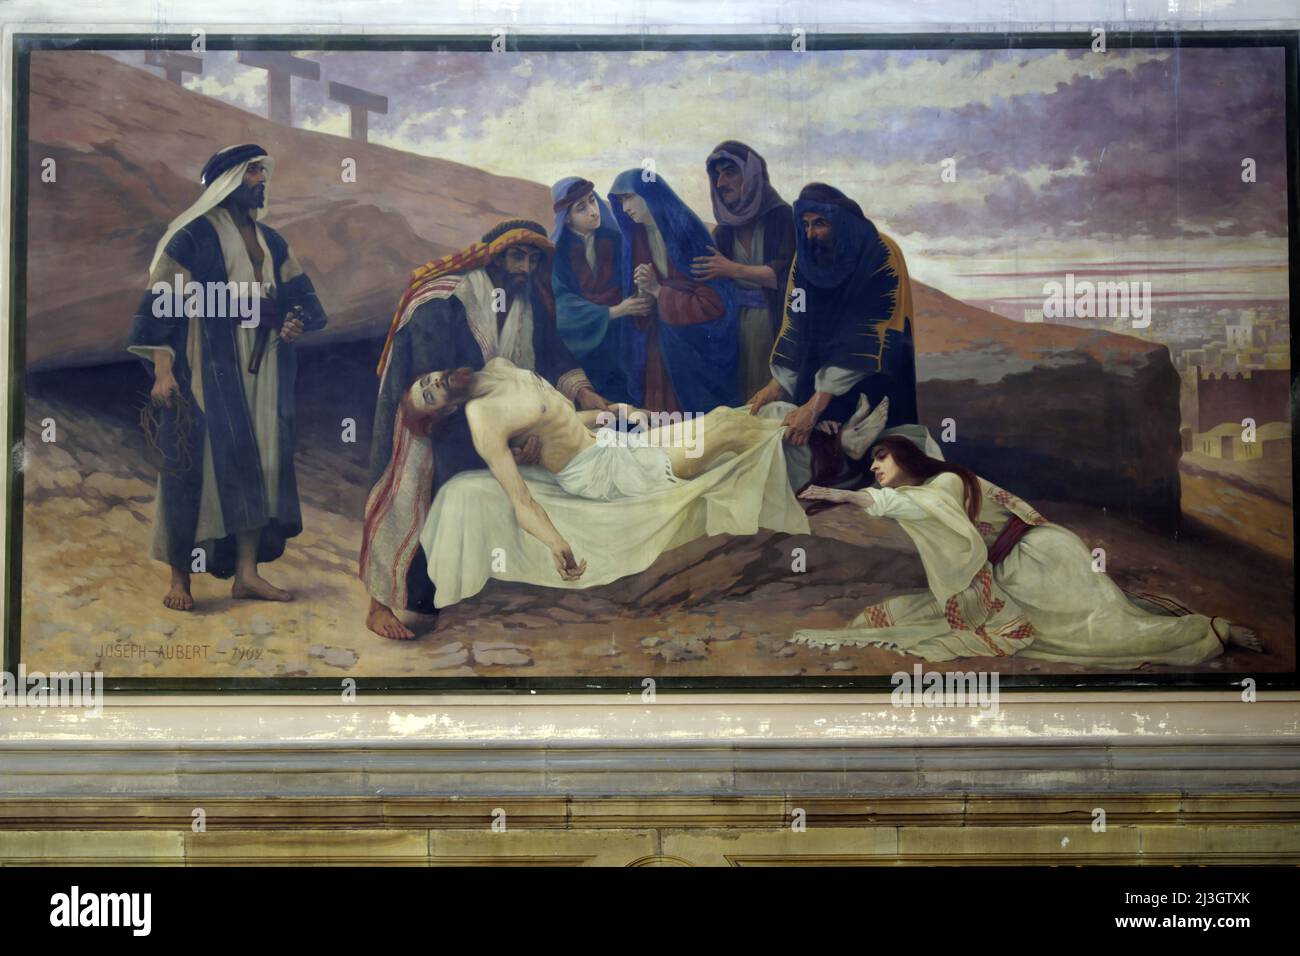 France, Doubs, Montbeliard, Saint Maimb½uf church dated 19th century, chapel of the Virgin, monumental painting The Lamentation of Christ, 1921 Stock Photo